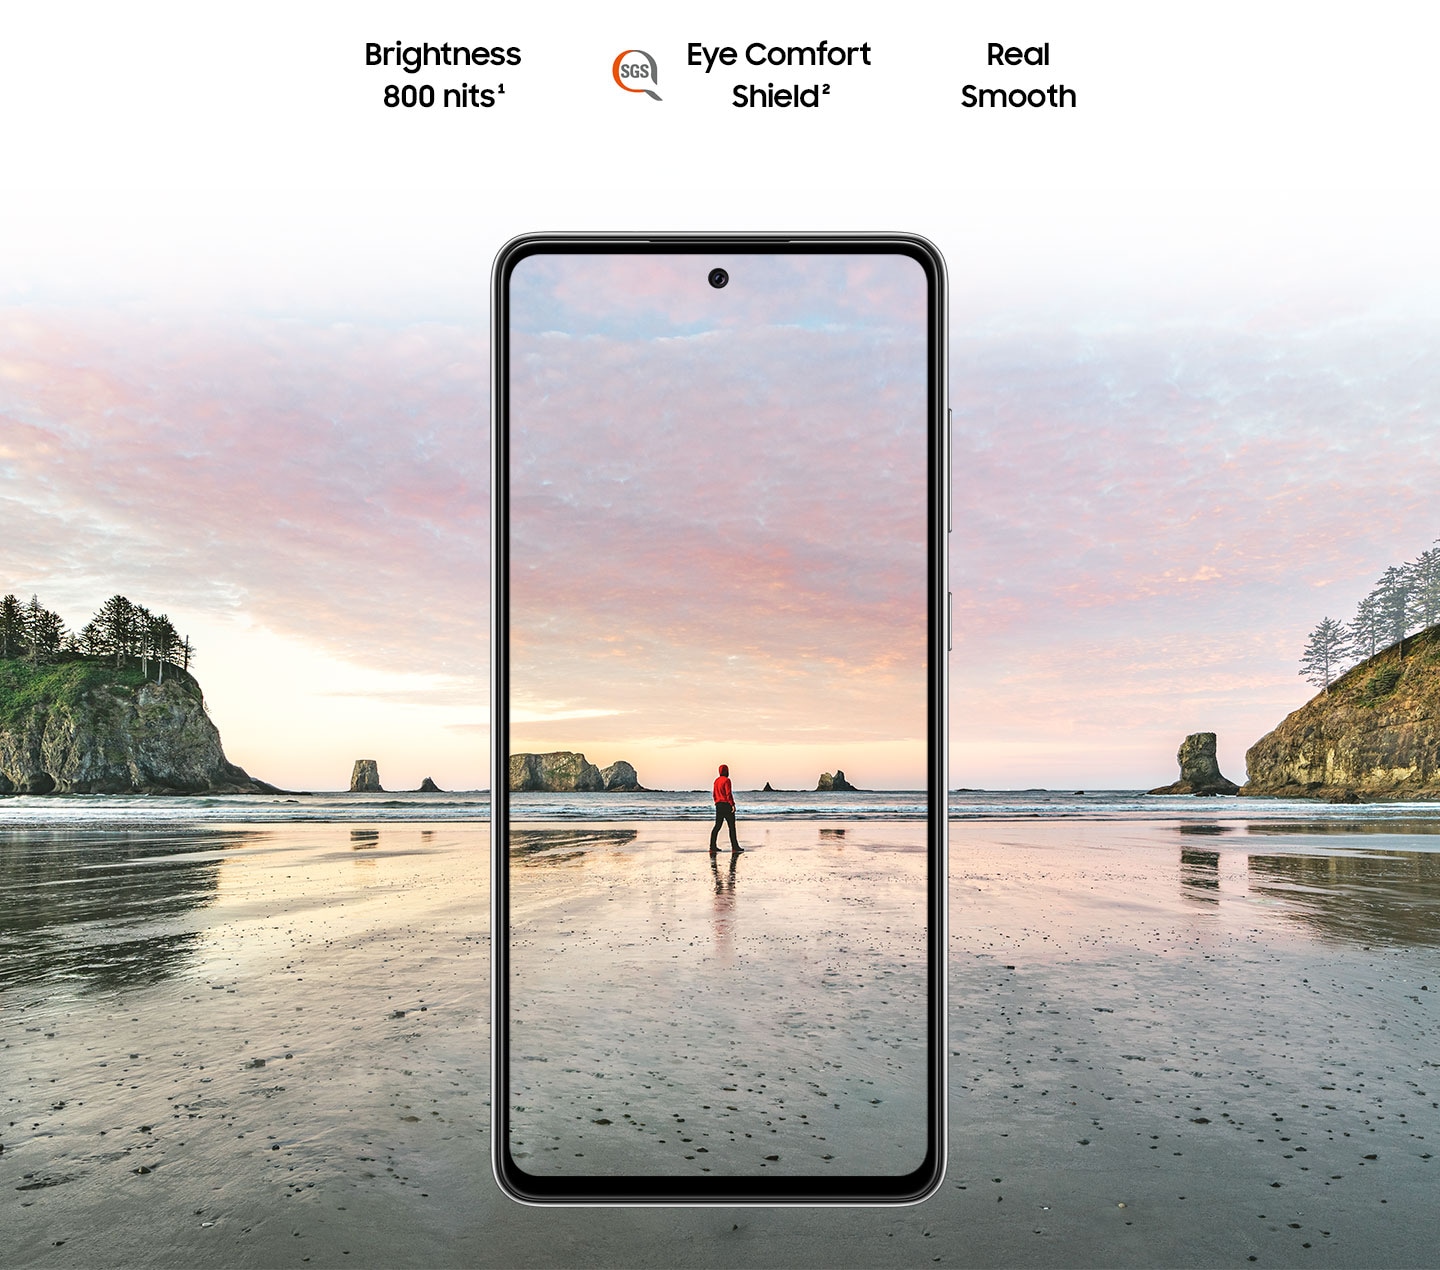 Galaxy A72 seen from the front. A scene of a man standing on a beach at sunset. Brightness 800 nits, Eye Comfort Shield with the SGS logo and Real Smooth.